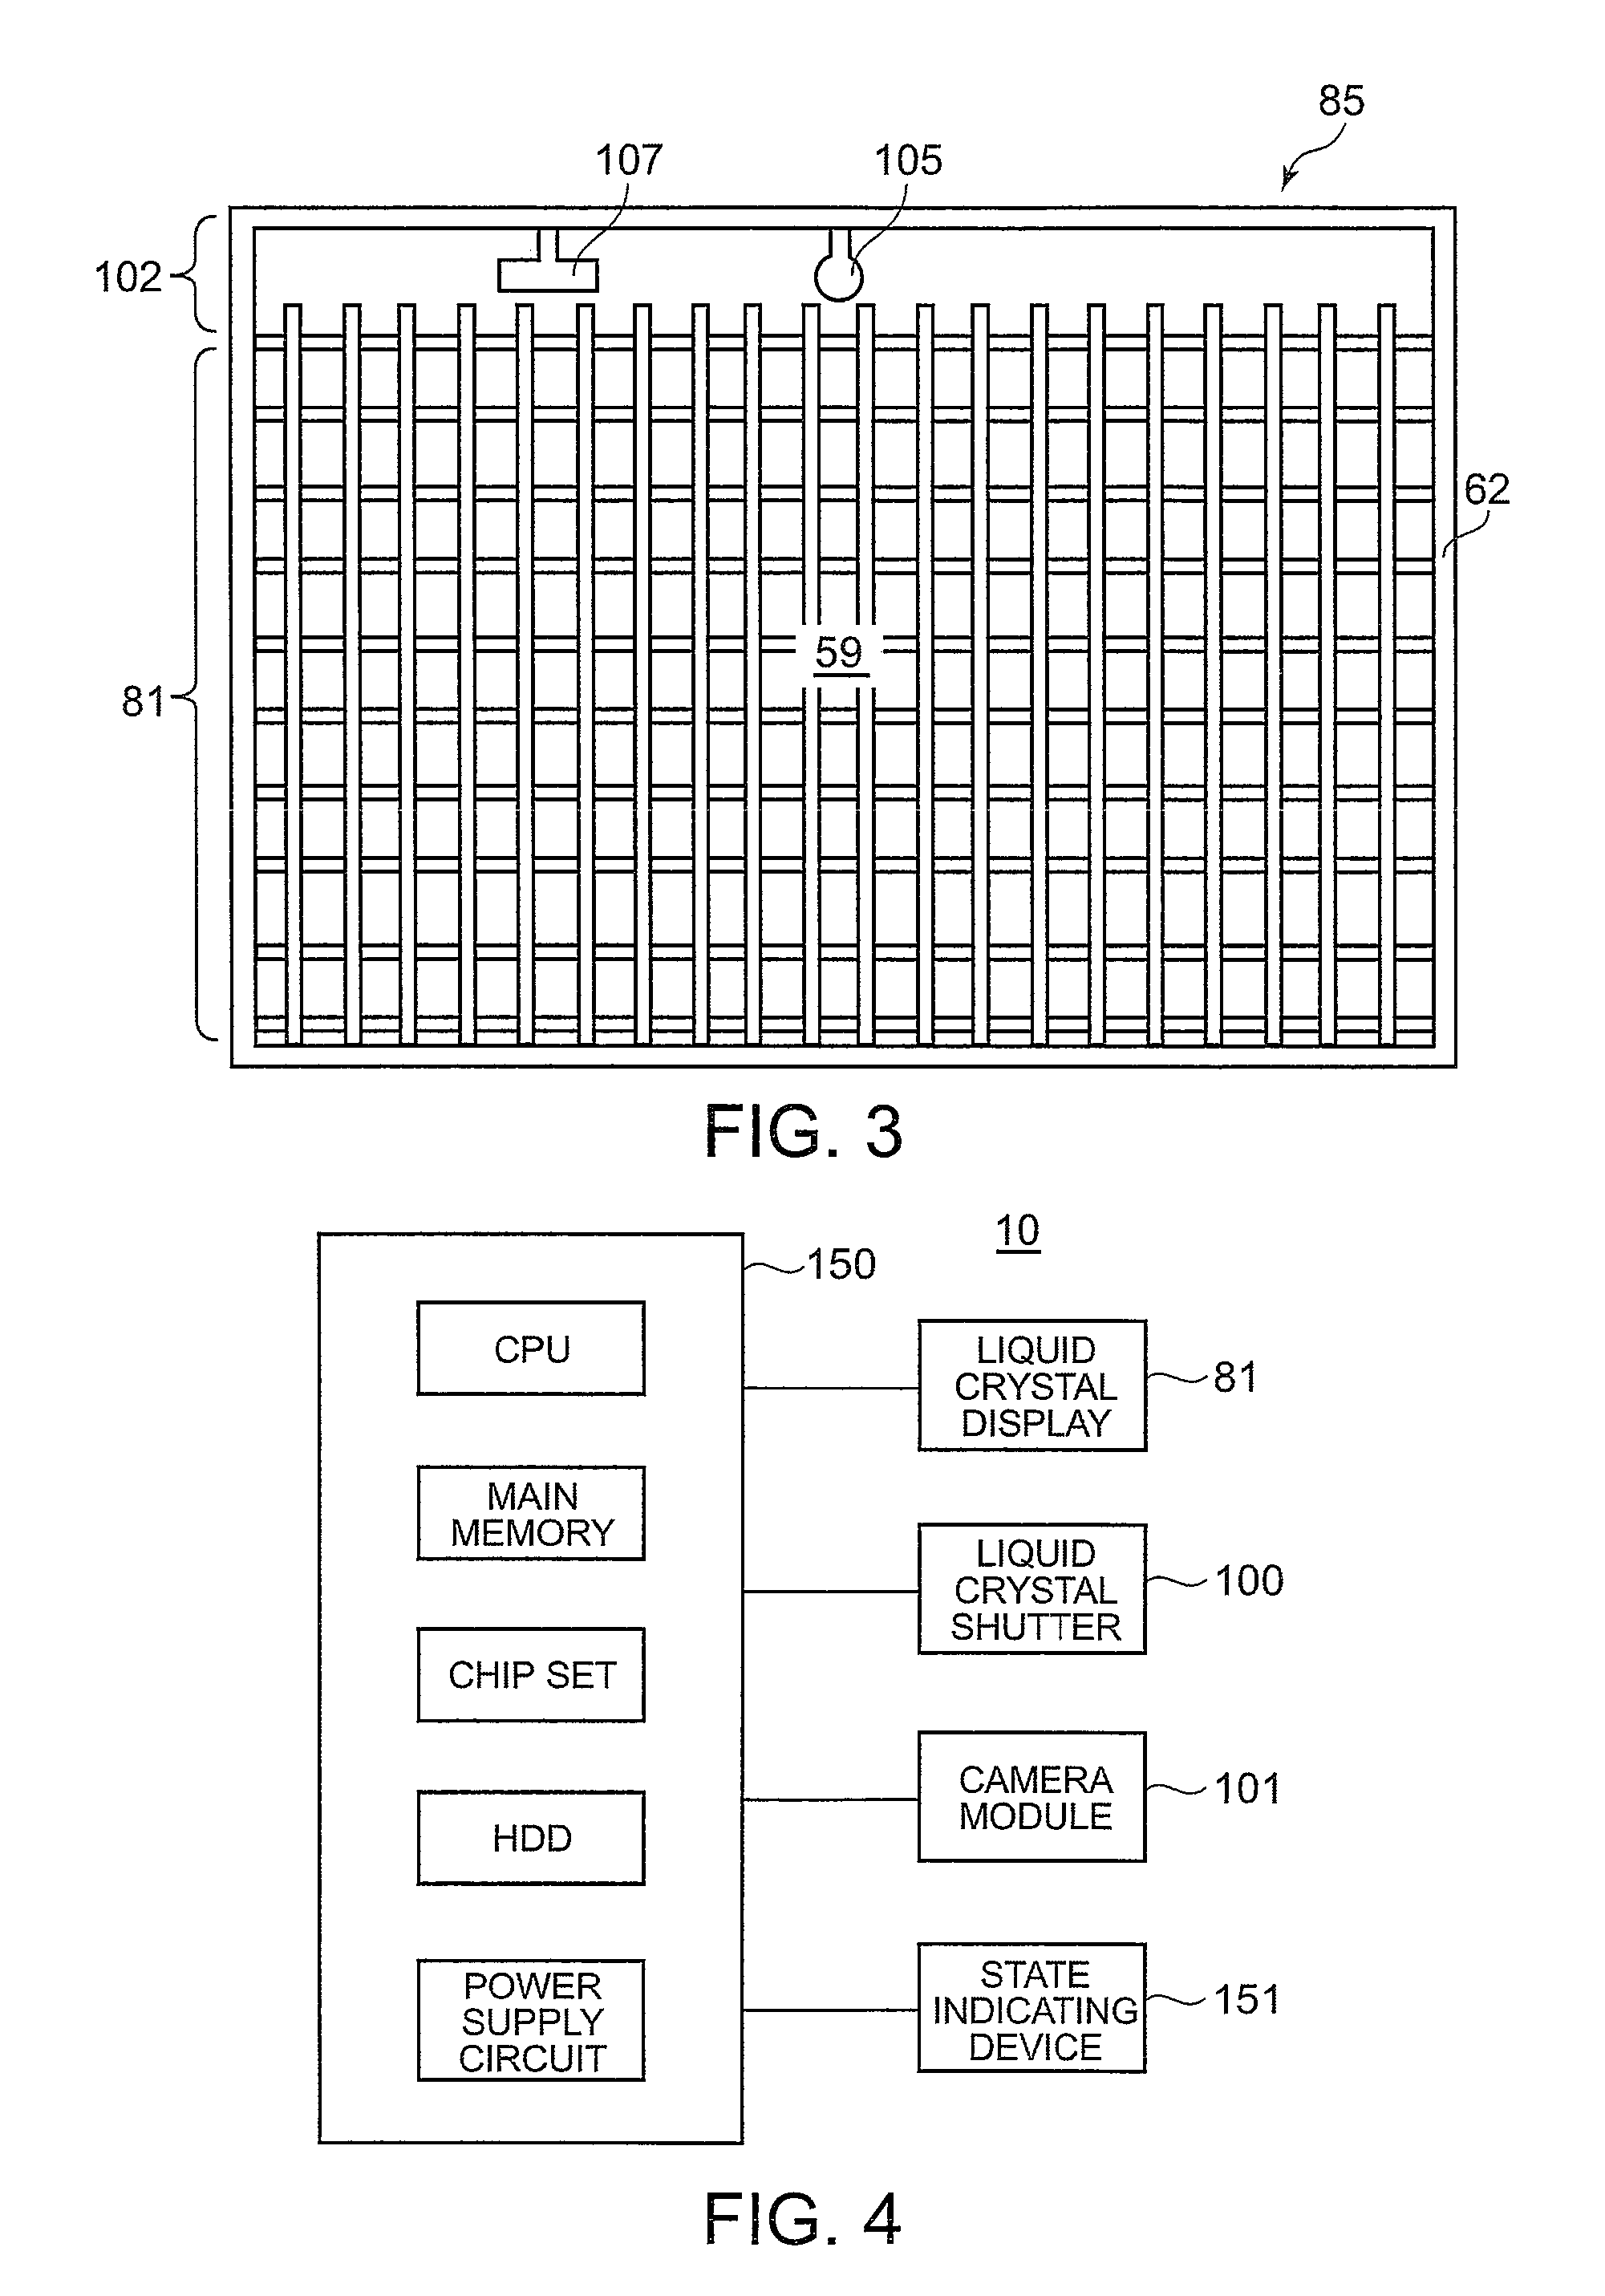 Electronic device having a liquid crystal shutter